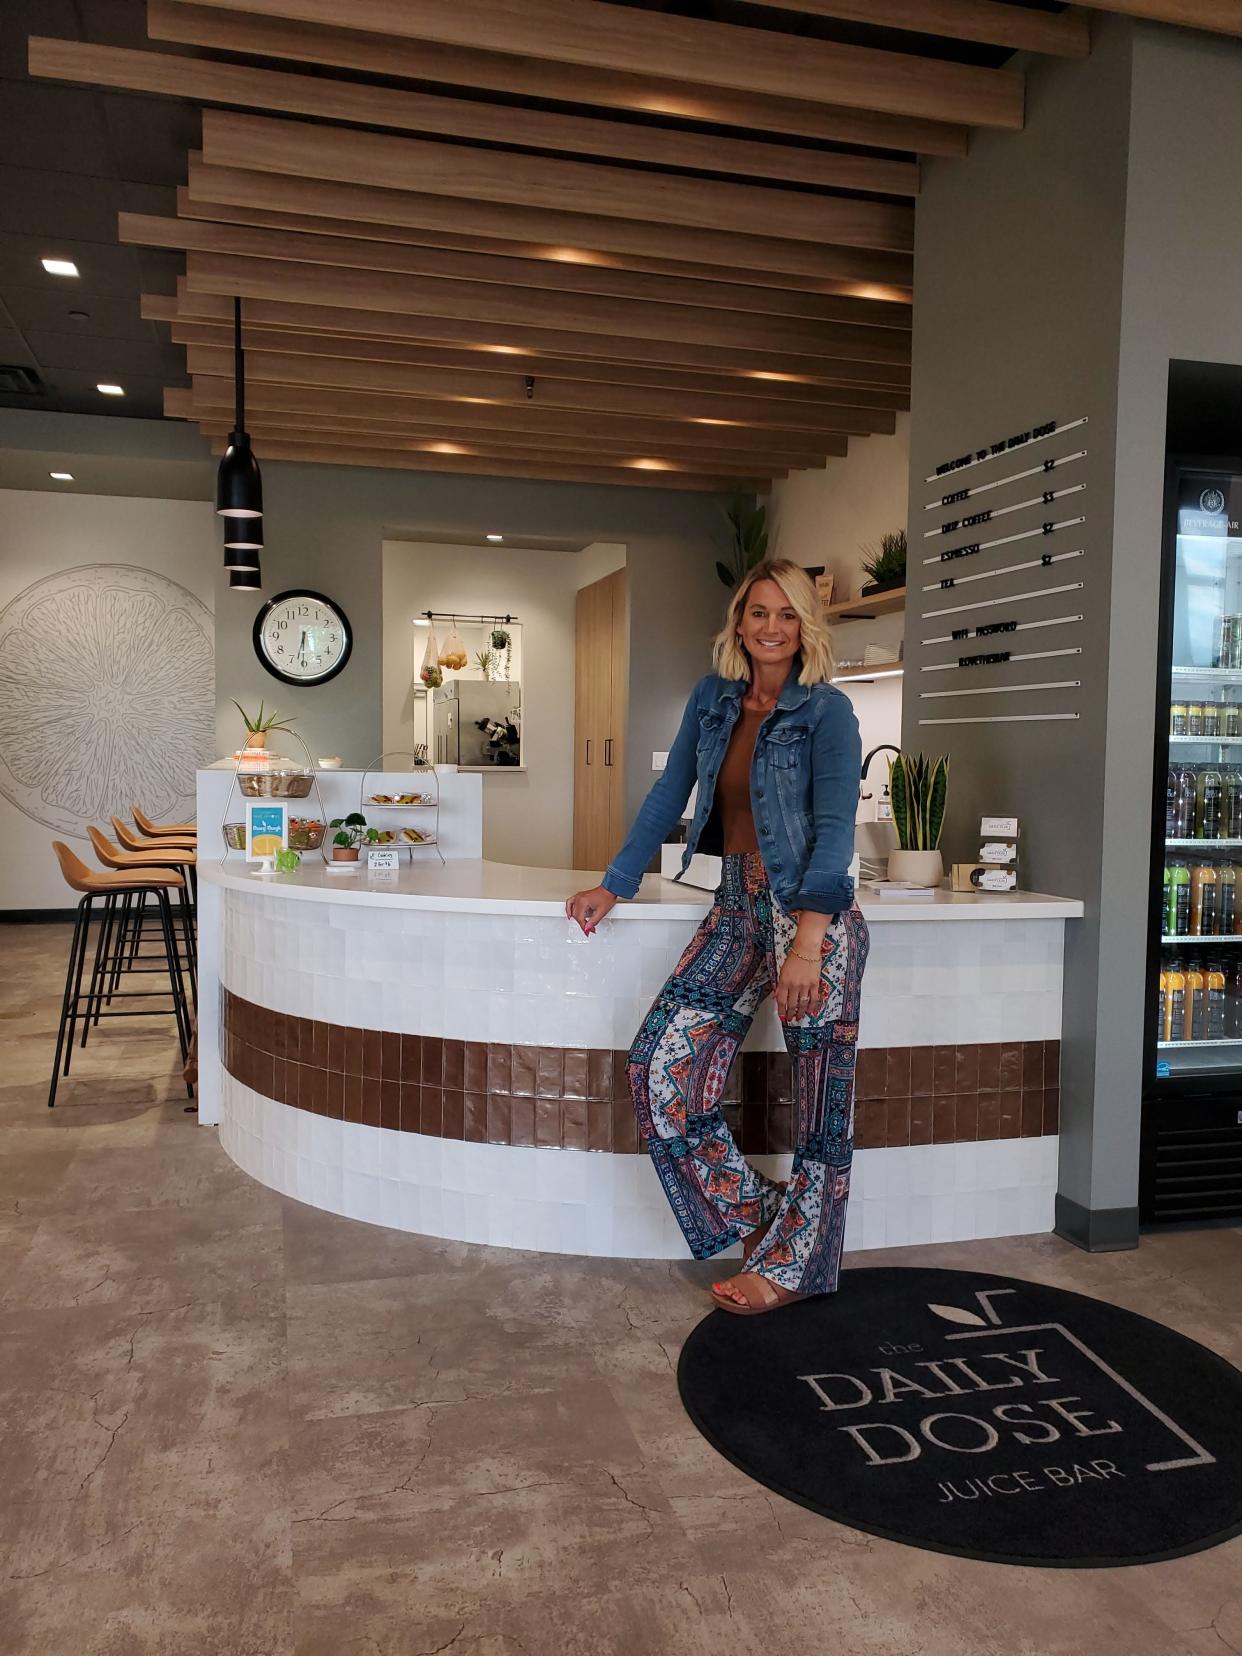 The Daily Dose owner Jenni Dobson is shown at the store's original Slinger location.